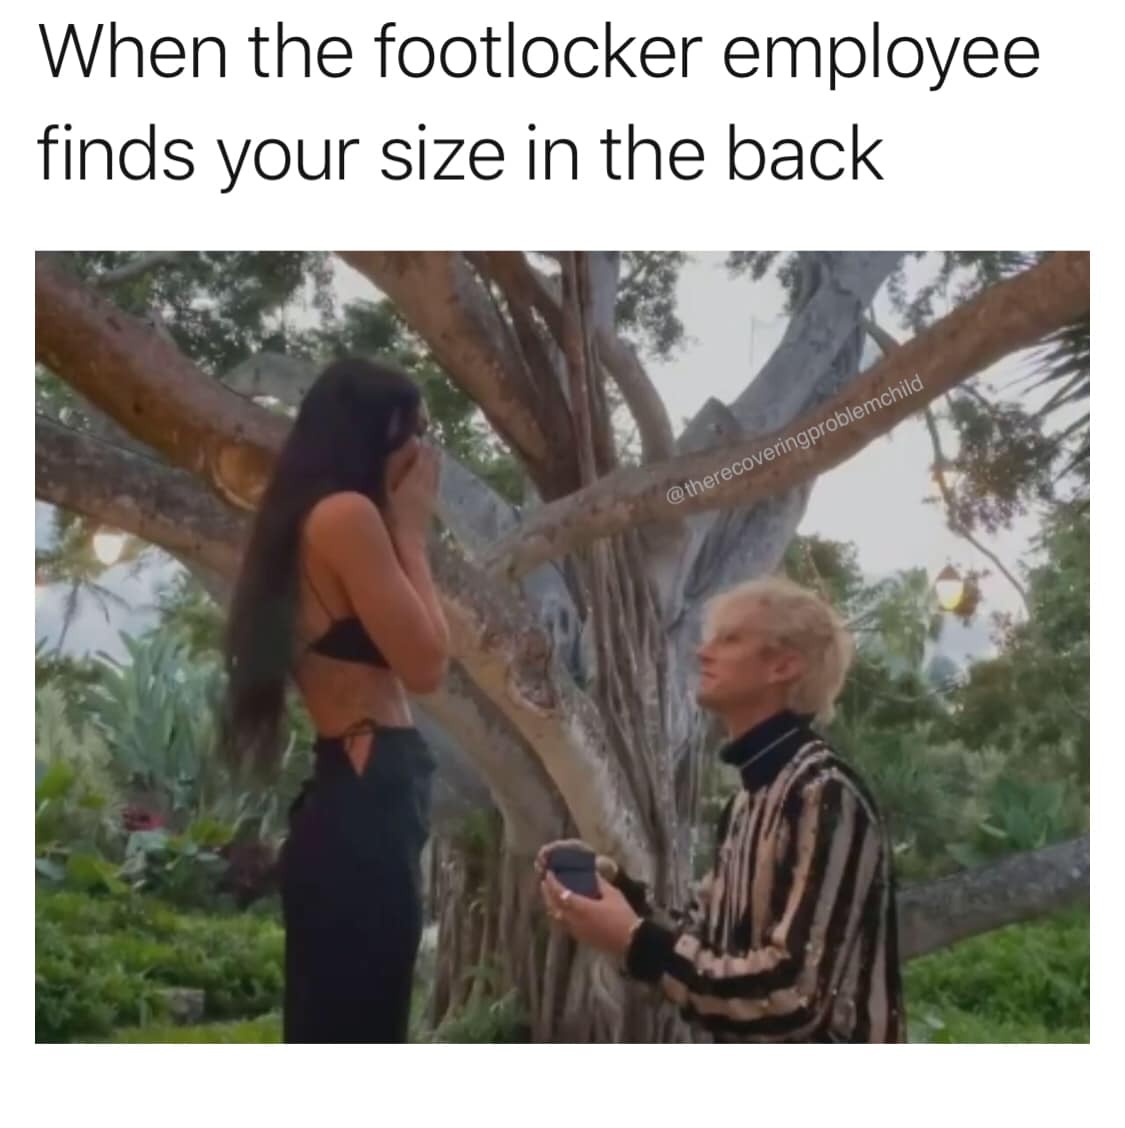 savage replies and comebacks - ulrich hr model - When the footlocker employee finds your size in the back